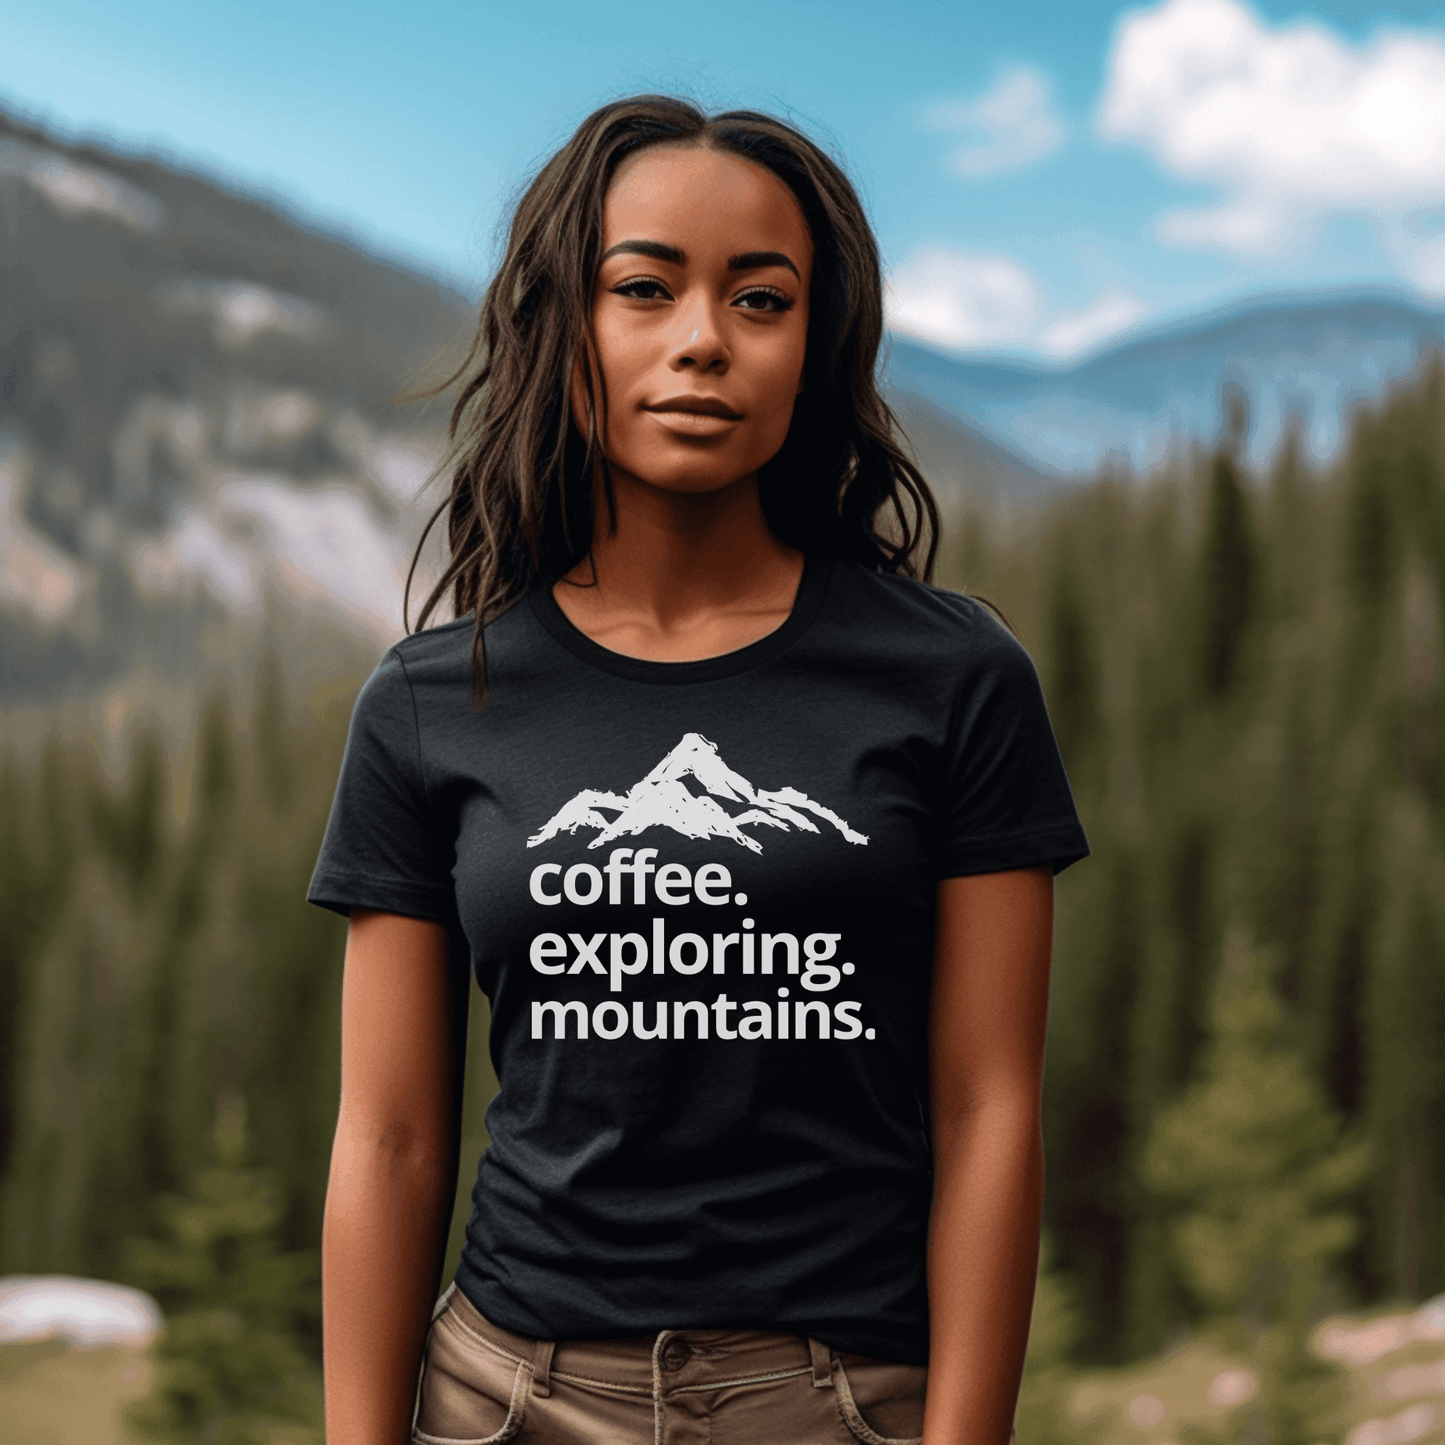 Coffee. Exploring. Mountains. T-Shirt - Adventure Threads Company